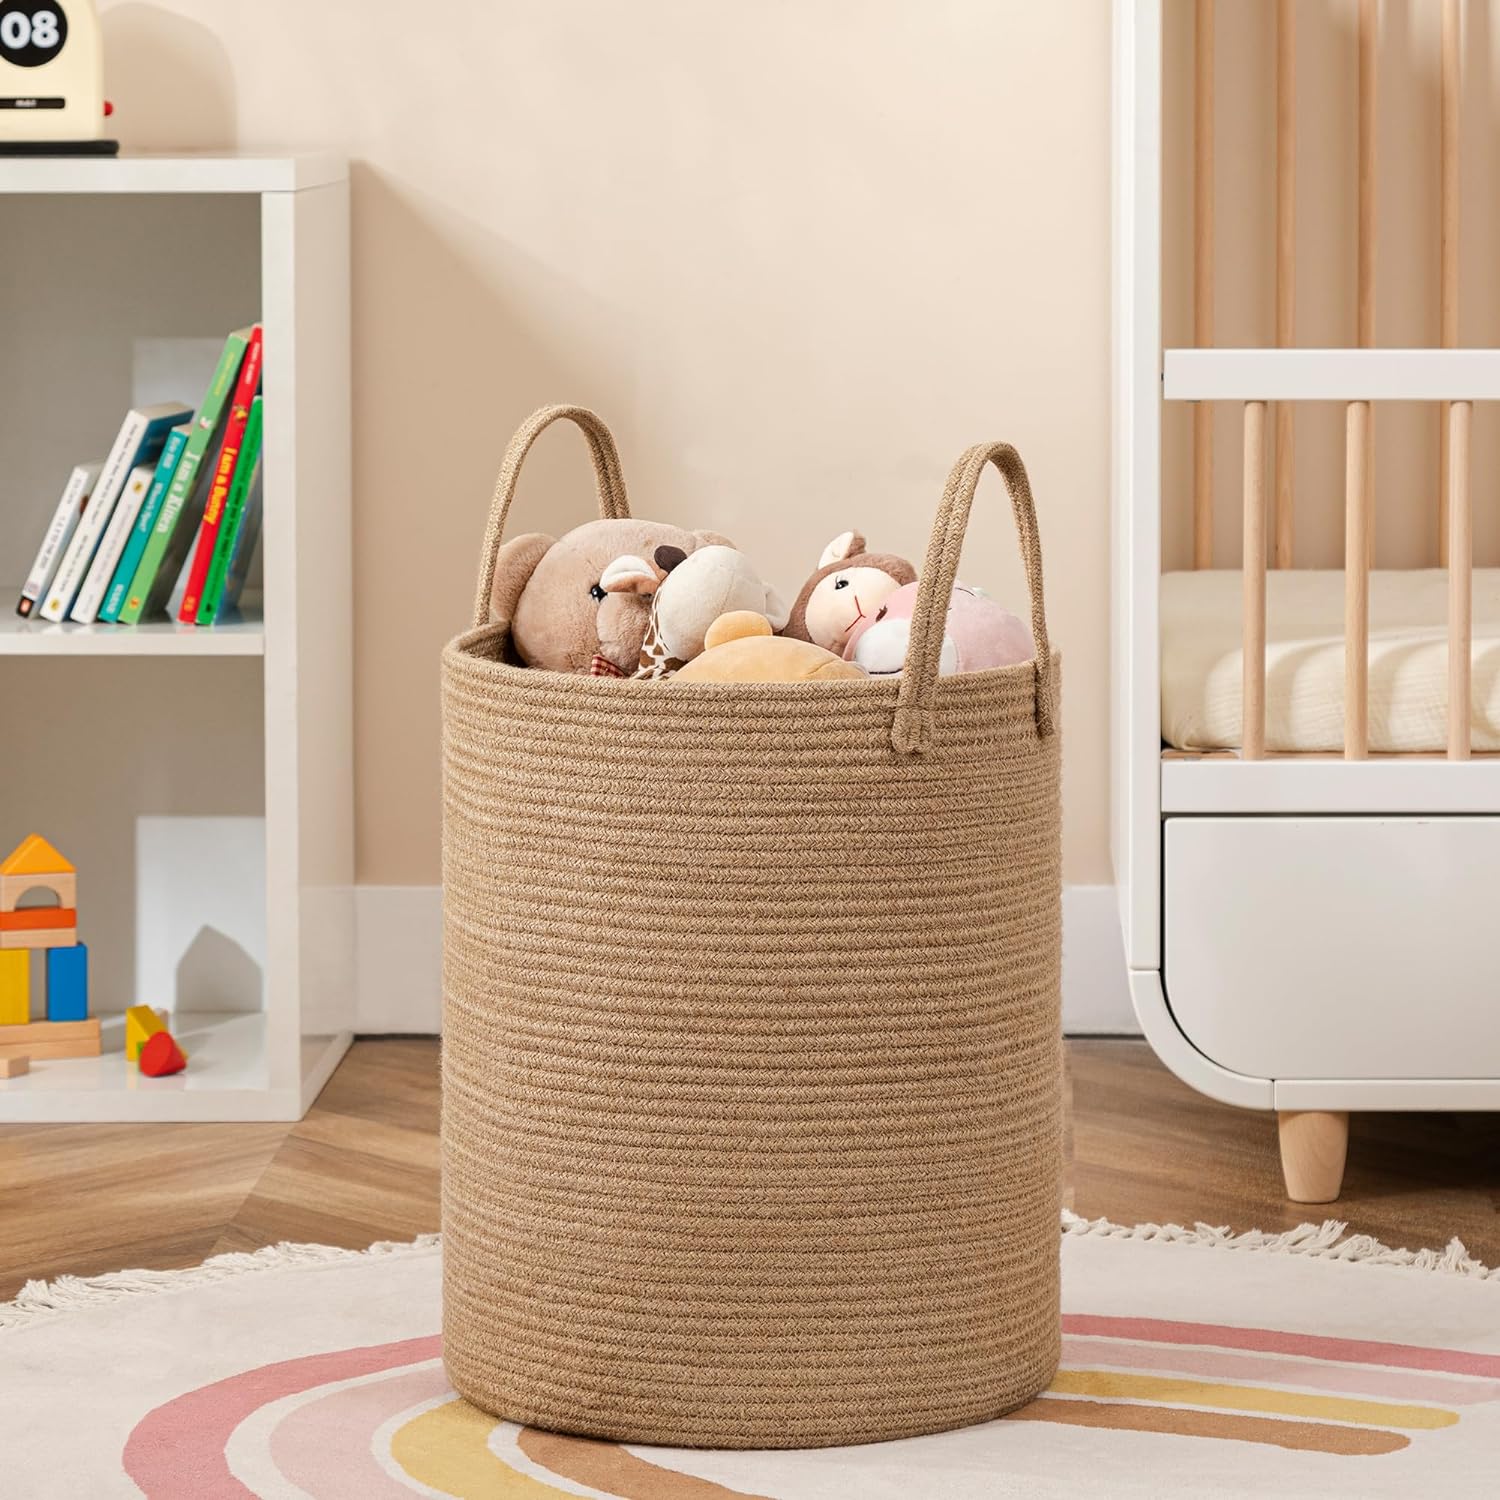 I initially ordered one of these to hold toys for my little daycare kiddos. Once it arrived and I realized the size and quality, I immediately ordered another for all of our blankets. These baskets are perfectly tall! The construction is beautiful and sturdy, while soft. These give off a completely neutral decor vibe that fits beautifully with farmhouse, boho, modern, or whatever. I could use one in every room of our home. They would even be beautiful laundry baskets, although I would purpose them for storage first, so you can stuff them full to reshape them after packaging.Highly recommend!